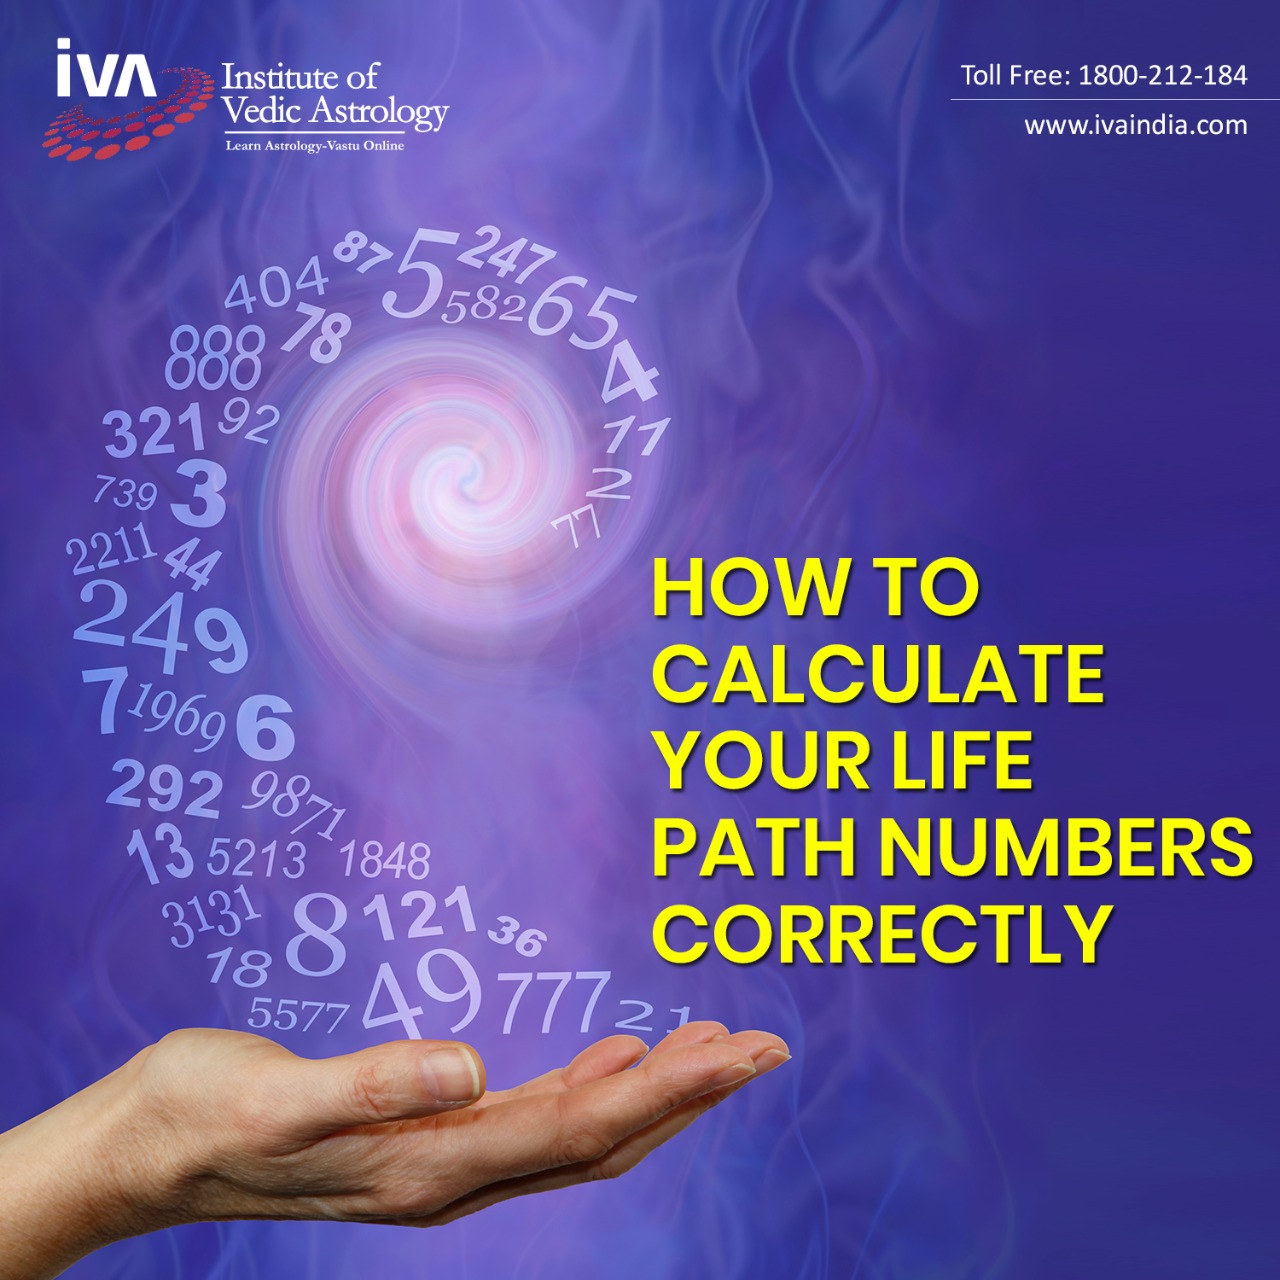 How to Calculate Your Life Path Numbers Correctly